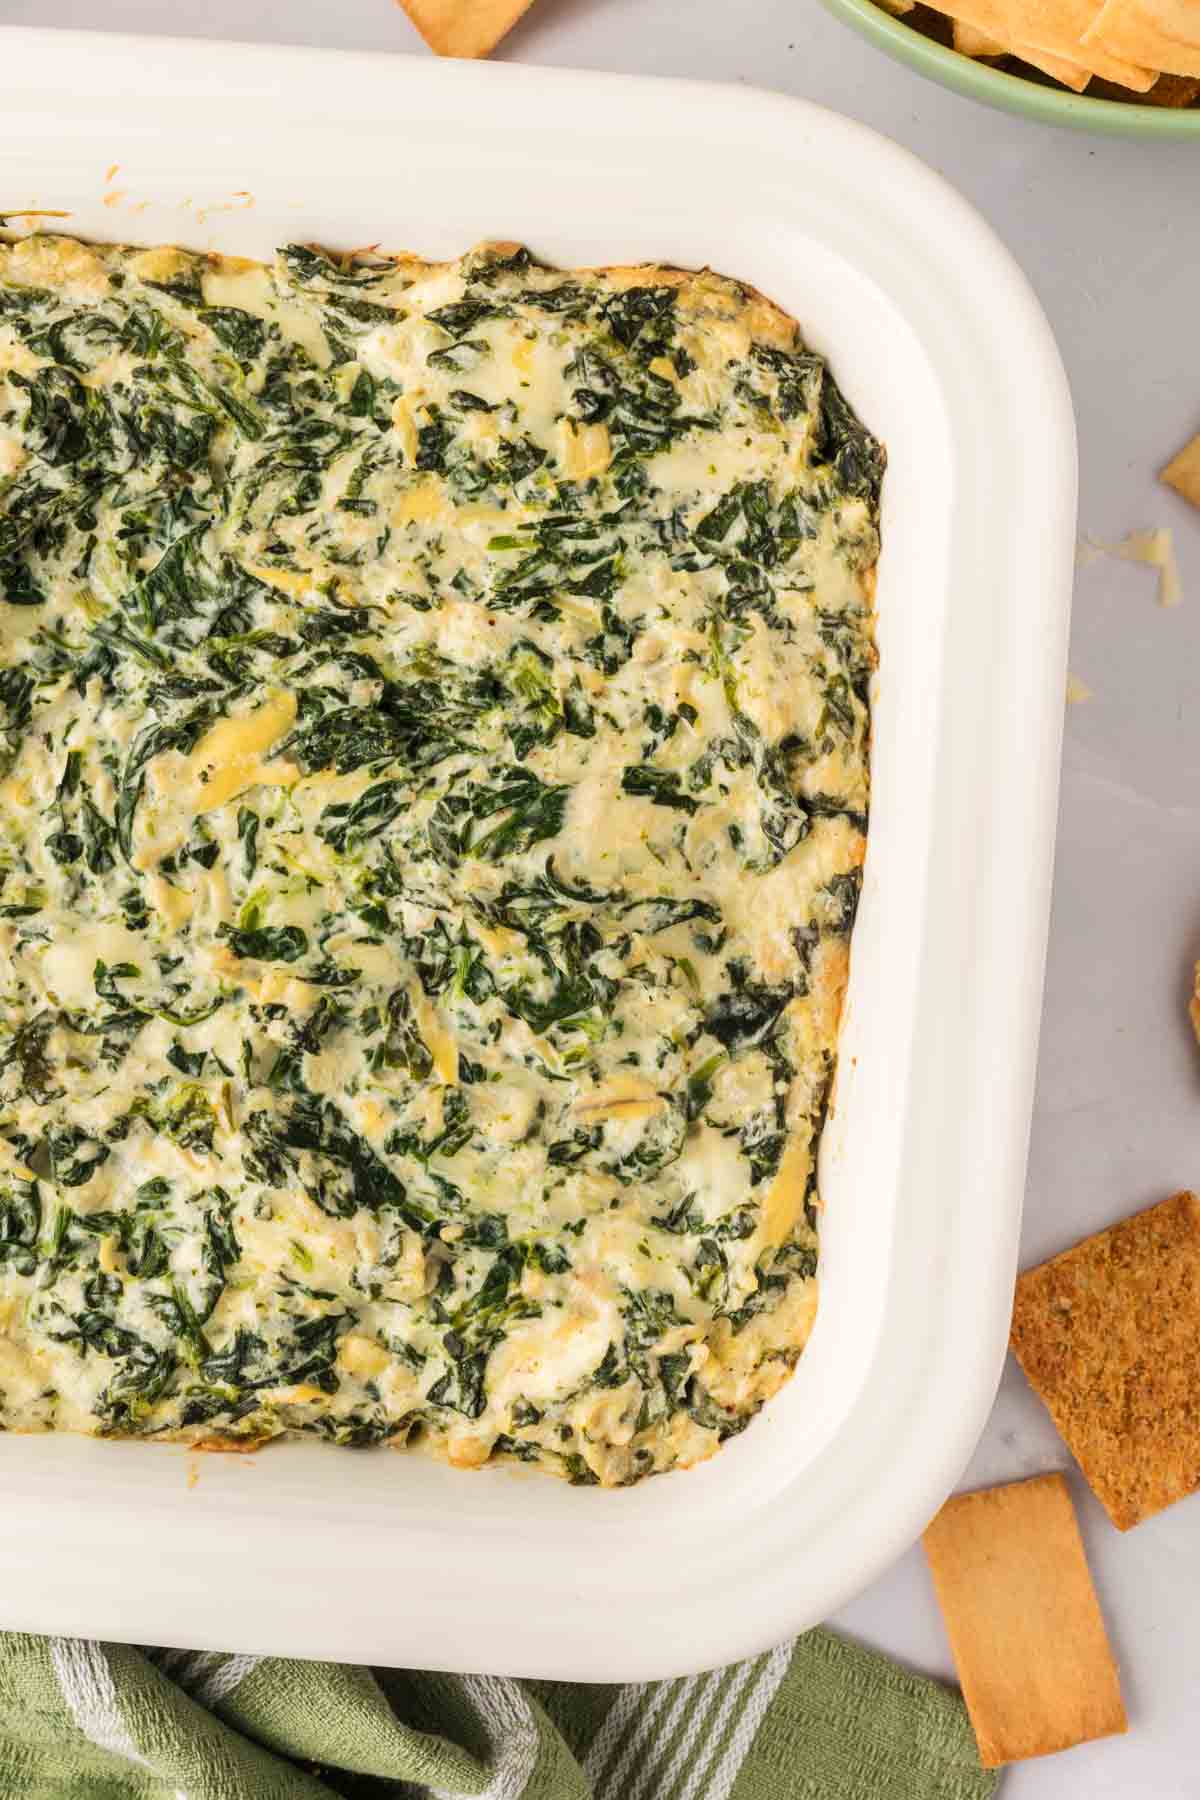 Spinach Artichoke Dip in a white casserole dish with a side of slice bread and chips